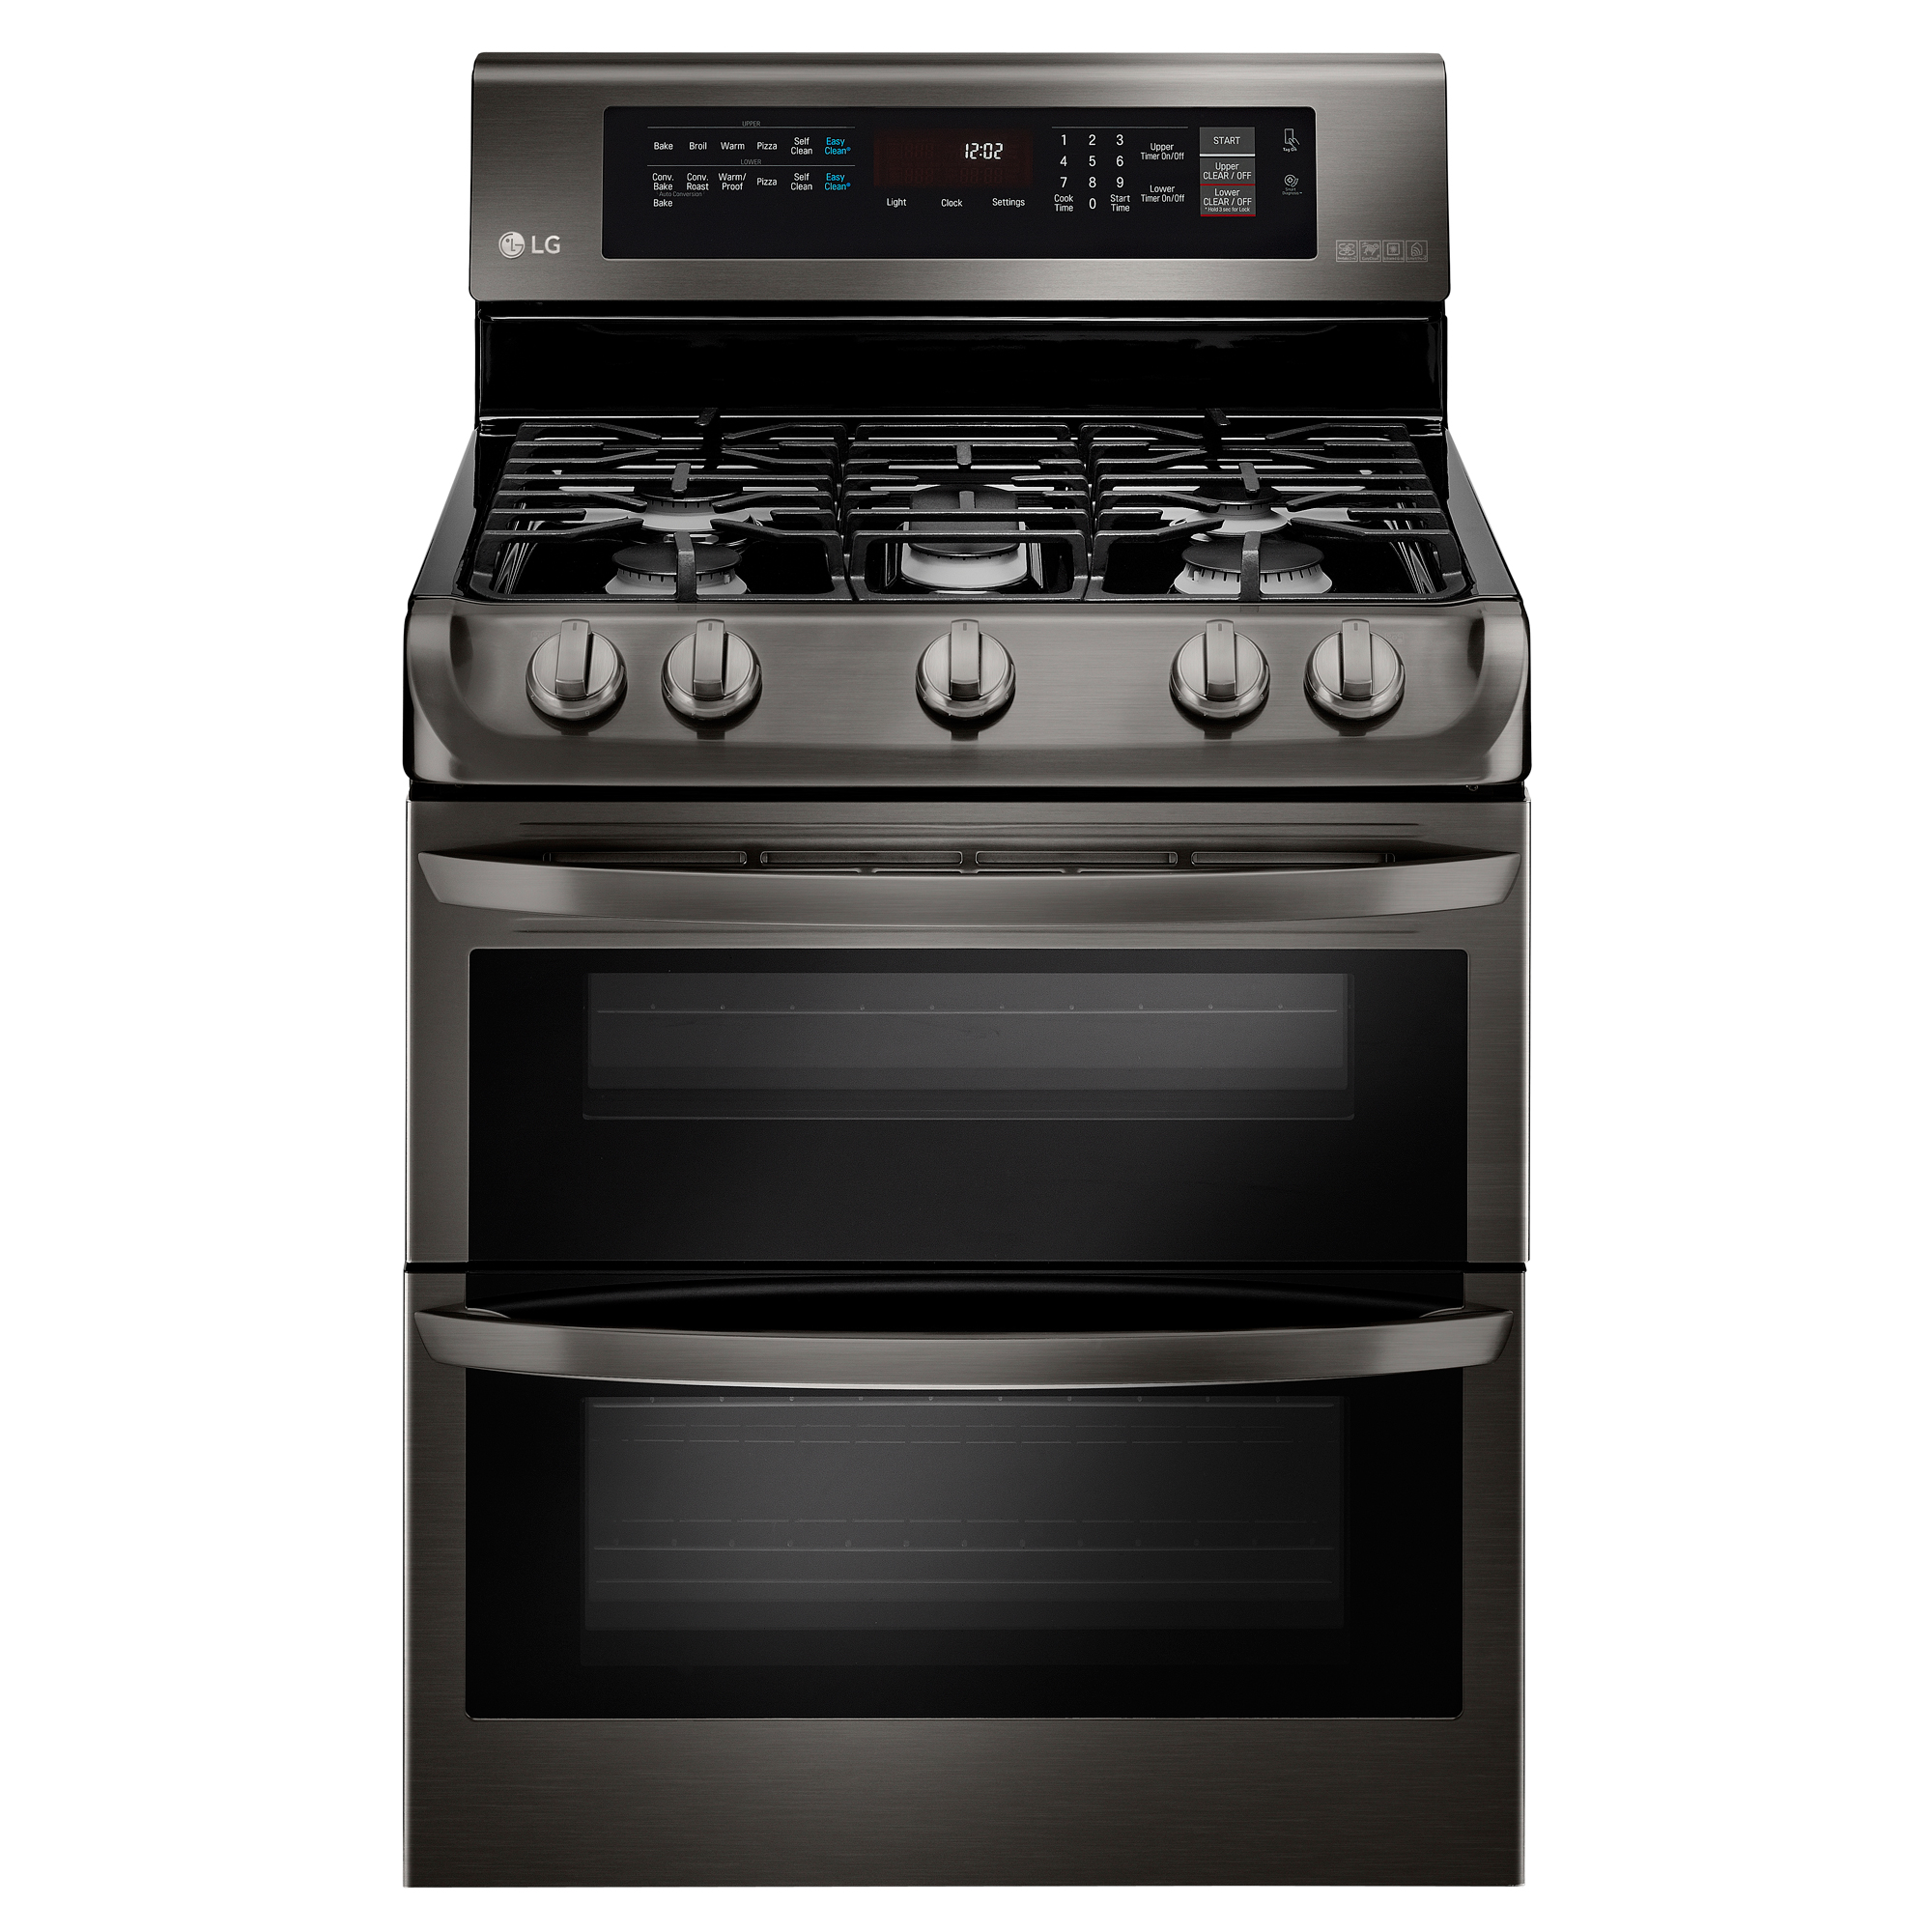 LG LDG4315BD 6.9 cu. ft. Gas Range with Double Convection Oven – Black Lg Stainless Steel Gas Stove